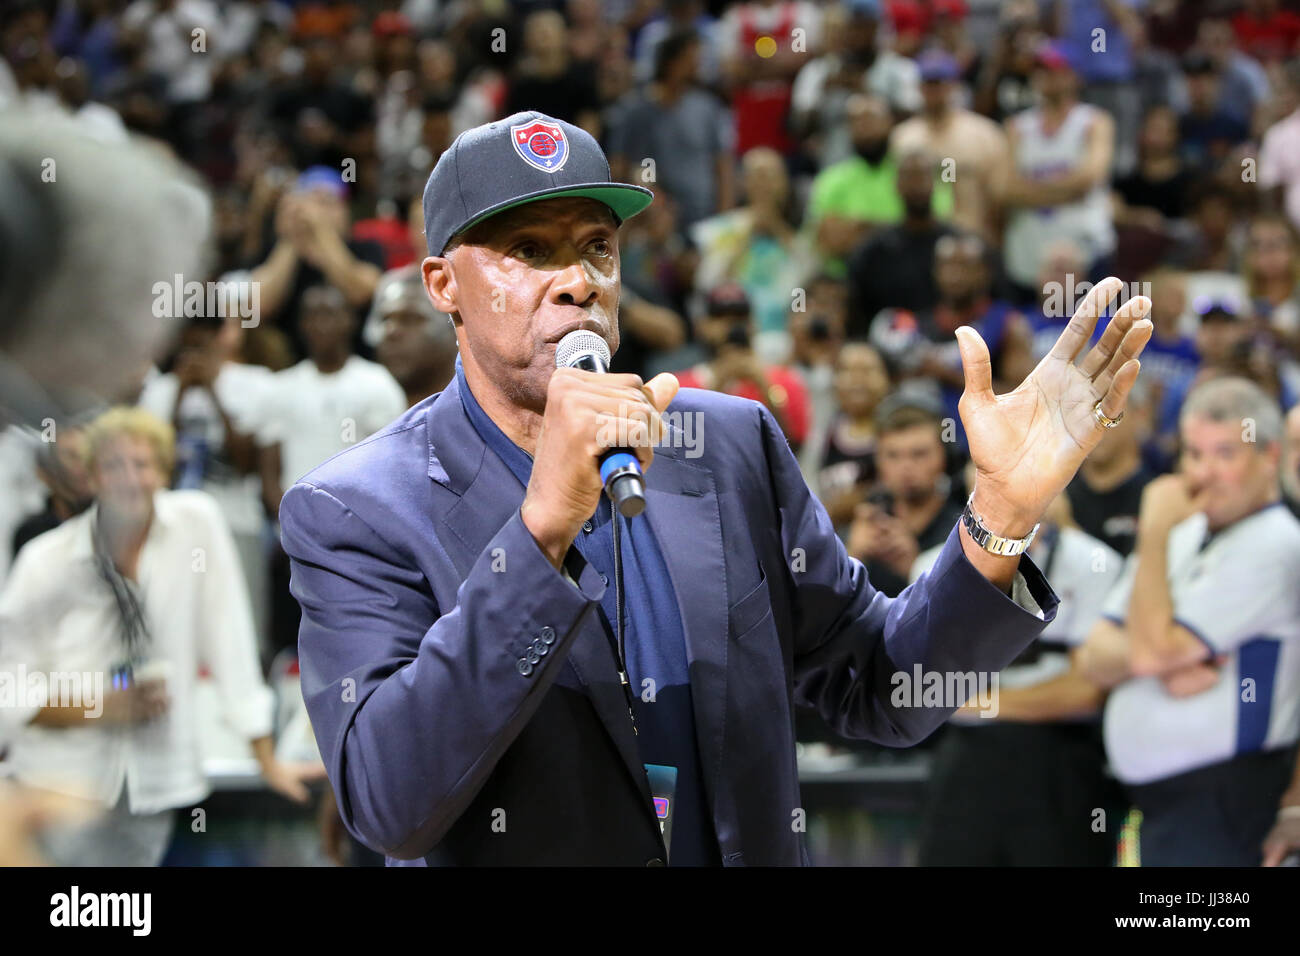 Julius Dr J Erving attends the Big 3 league in Phiily, PA on 7/16/17 Stock Photo